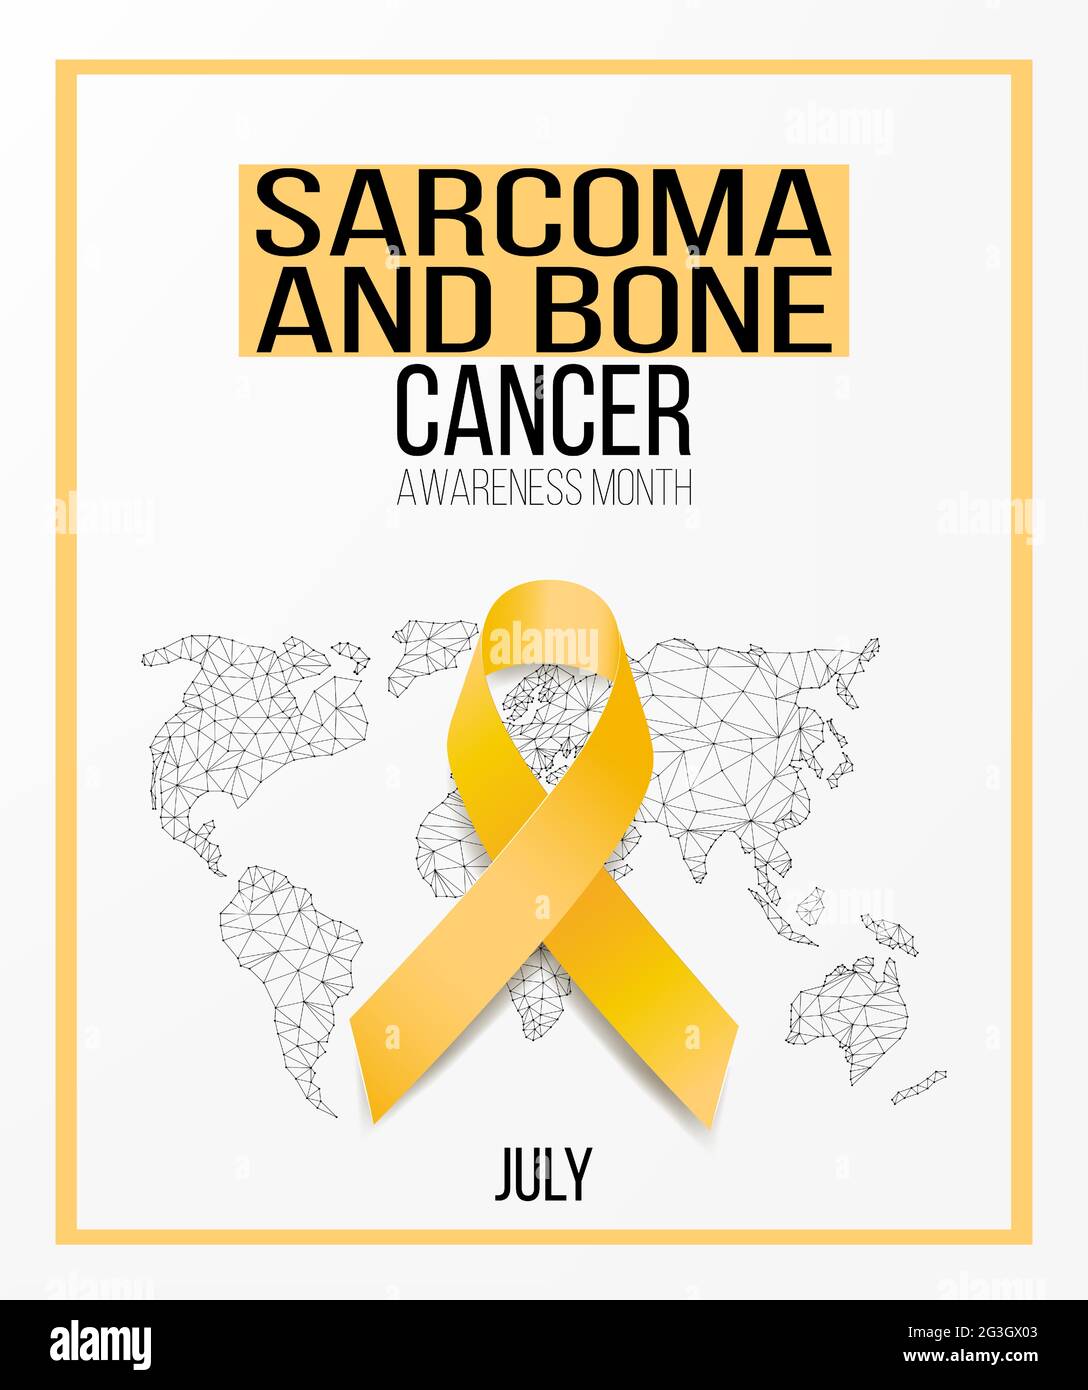 Sarcoma cancer awareness month concept. Banner template with yellow ribbon, text and world map. Vector illustration. Stock Vector